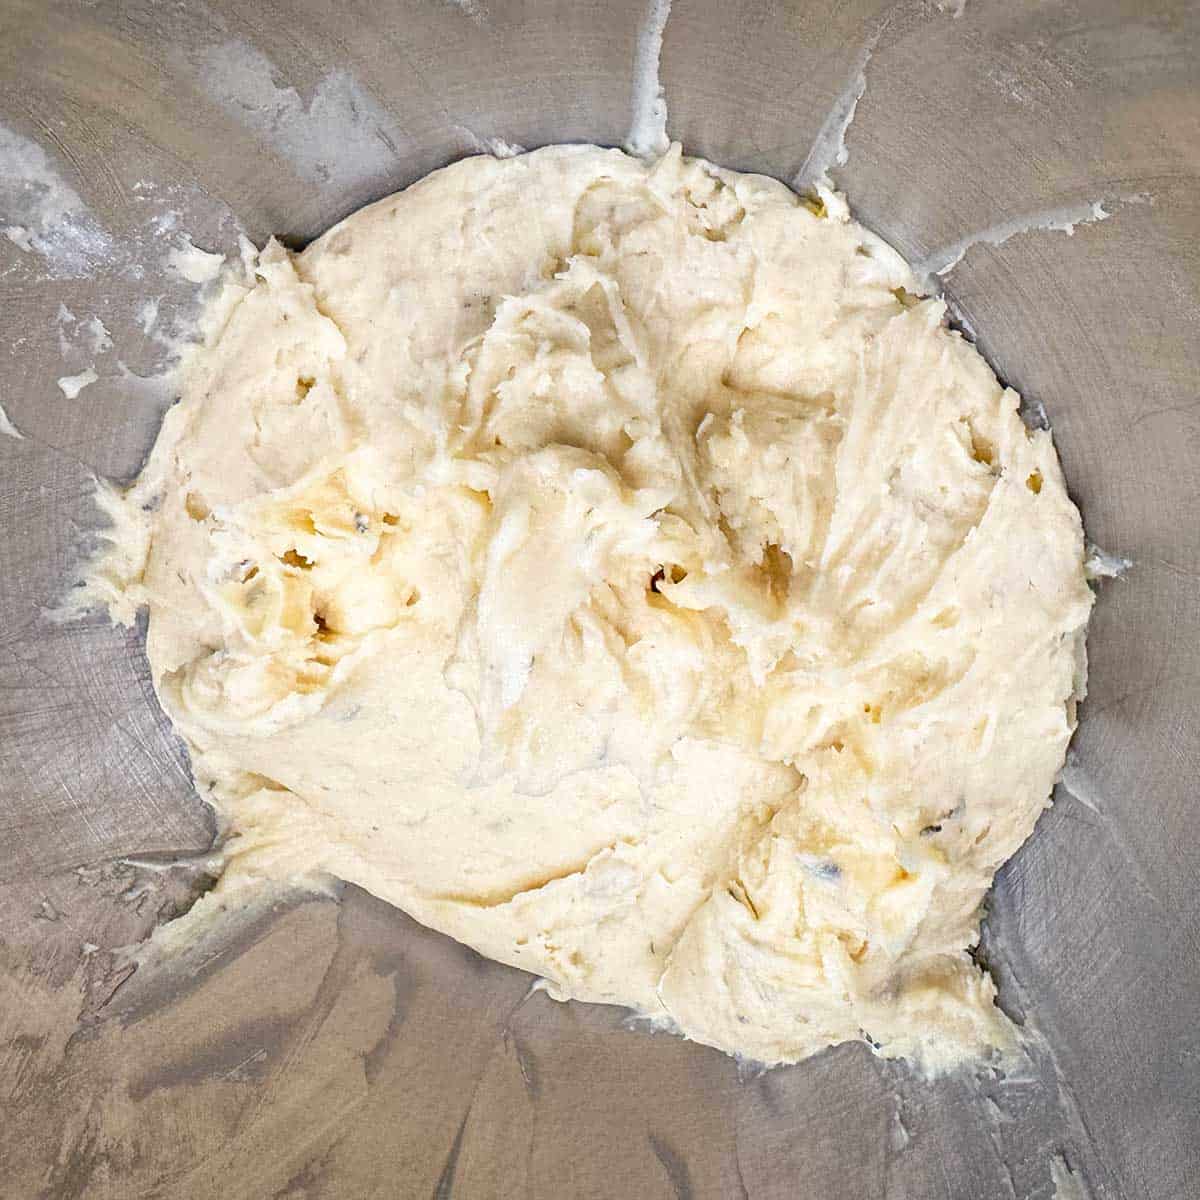 Cookie dough looks all together after adding the flour.